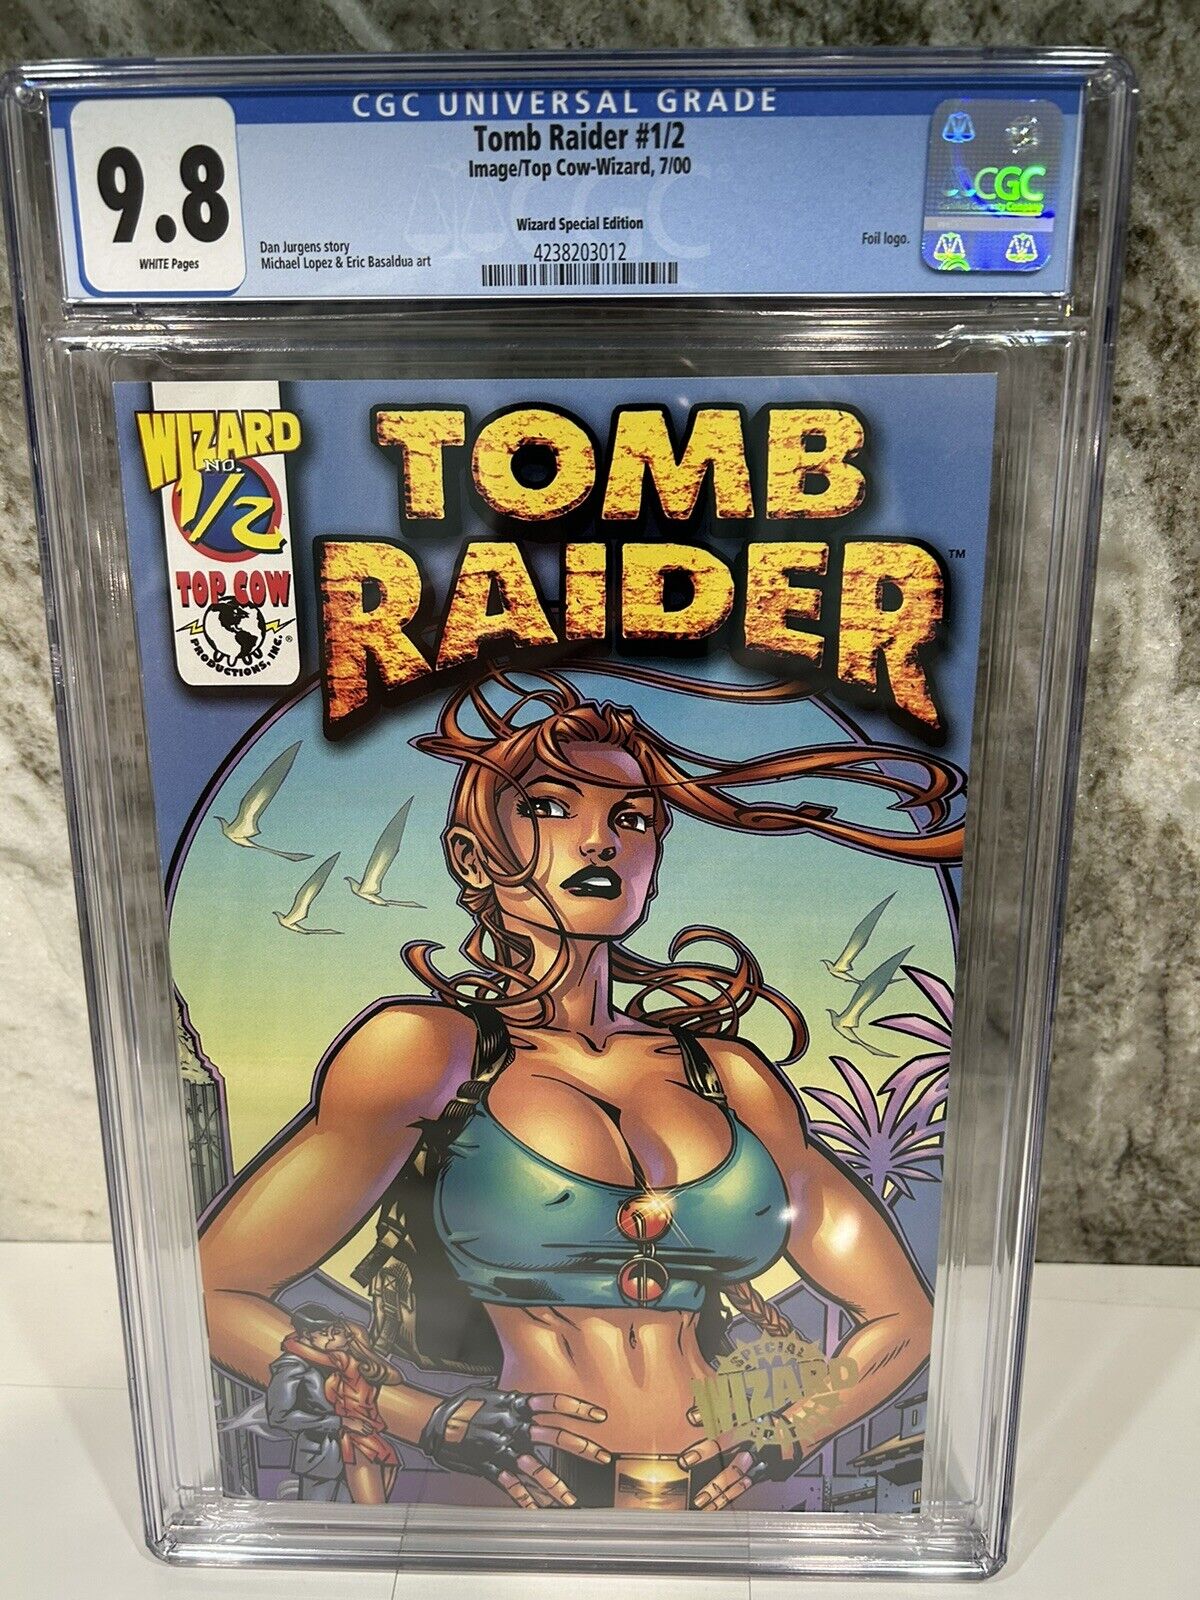 Tomb Raider Wizard 1/2 CGC Graded 9.8 white page Laura croft, special edition